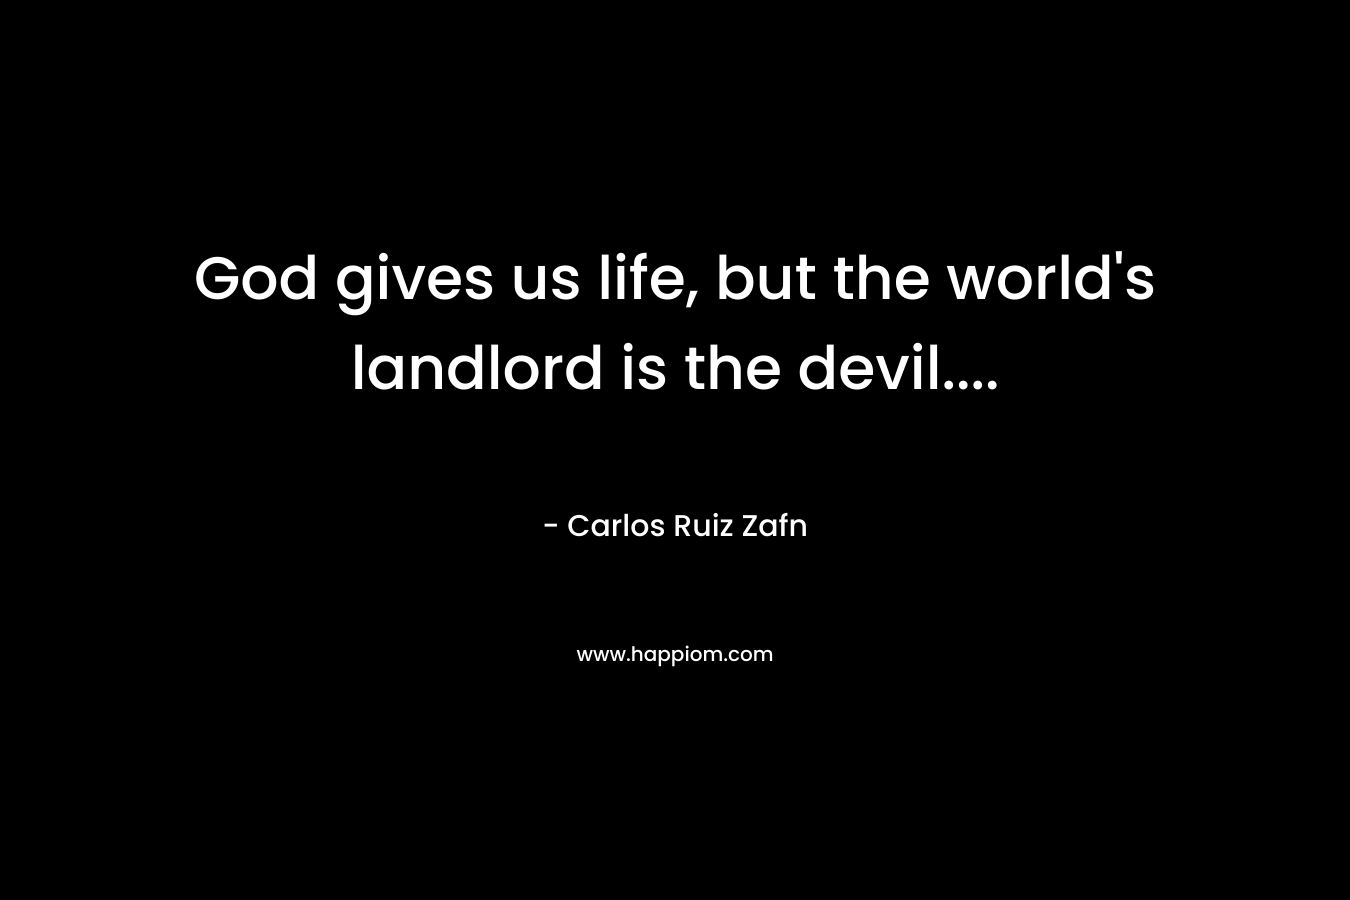 God gives us life, but the world's landlord is the devil....